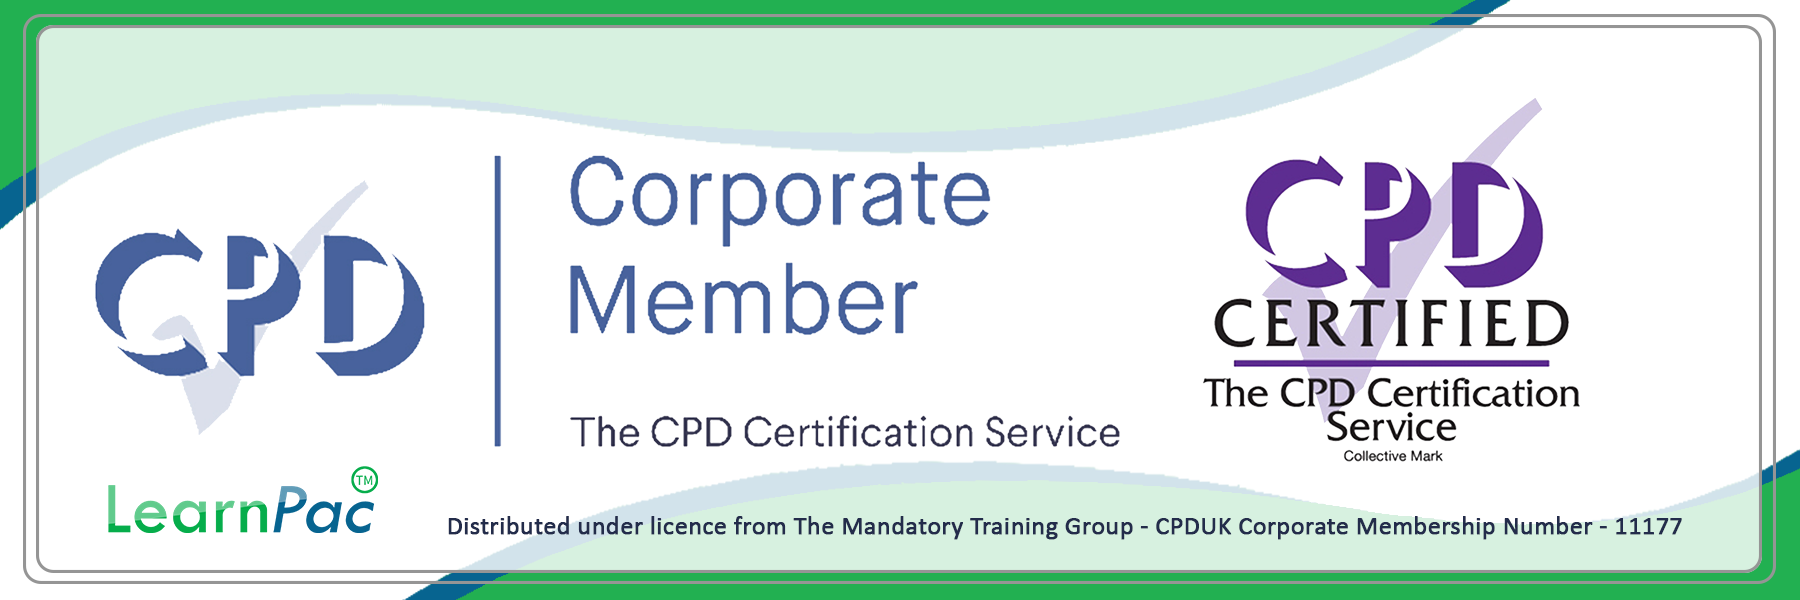 Health and Safety Training - E-Learning Courses with Certificates - CPD Certified - LearnPac Systems UK -